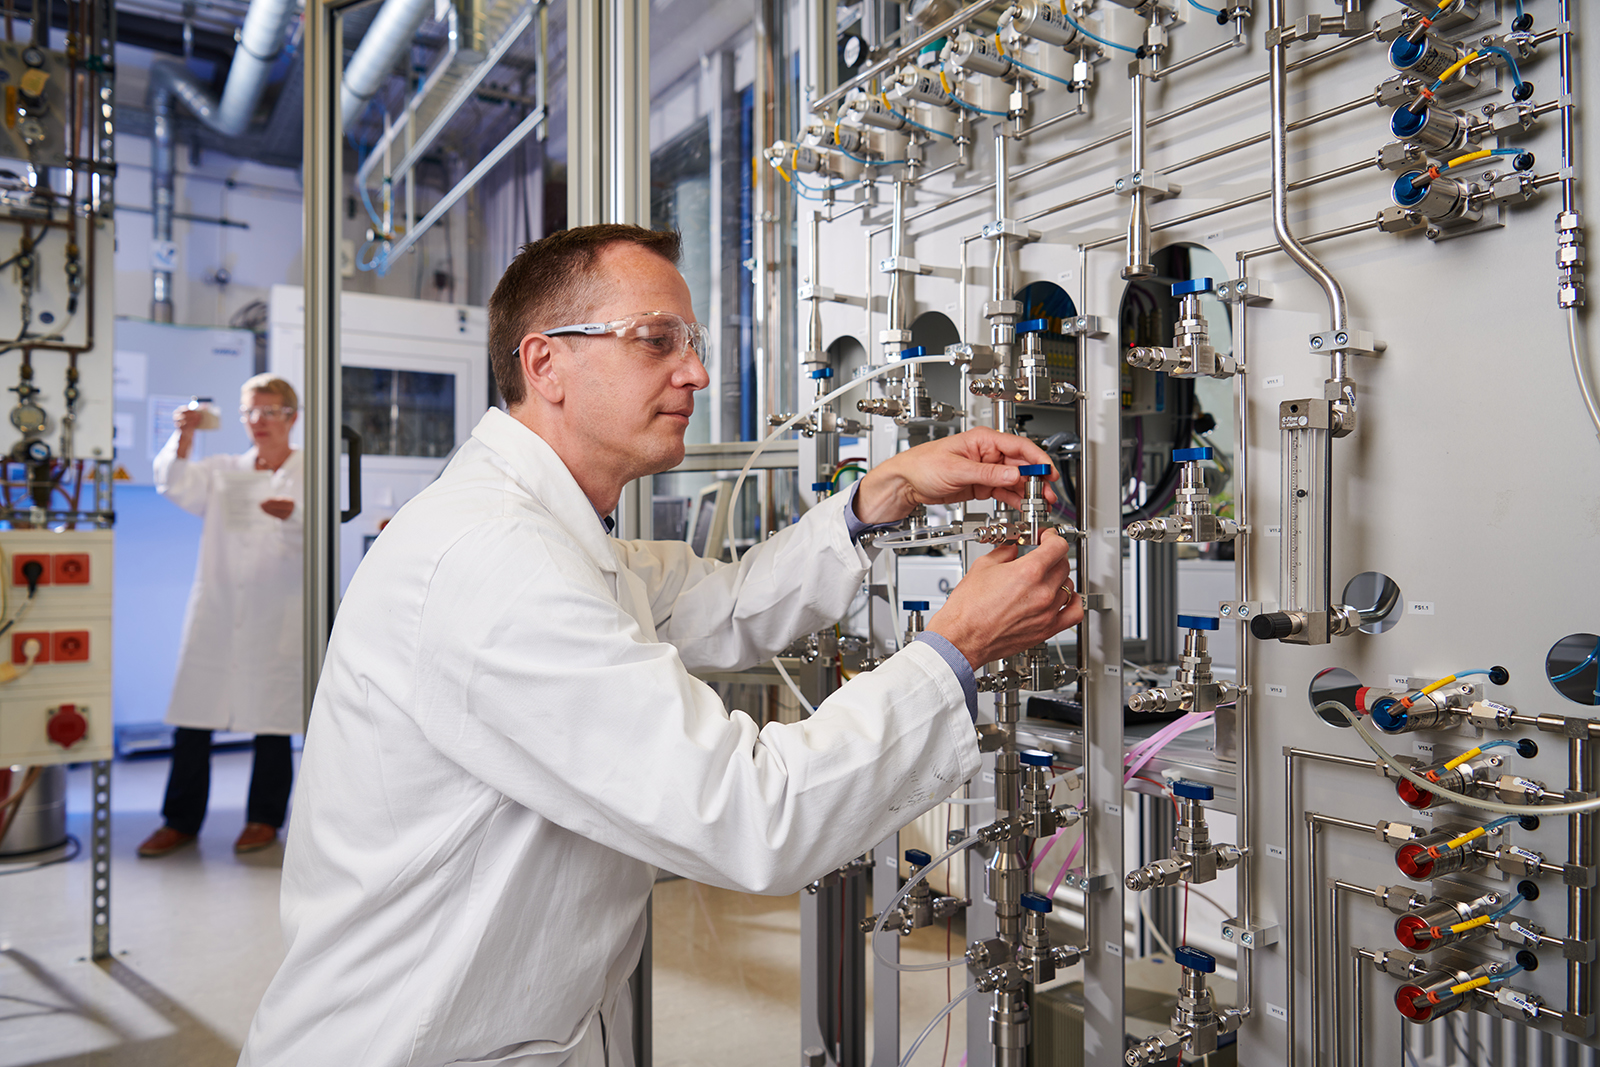 Researchers at Fraunhofer IWS use a multi-adsorption system to investigate the adsorption behaviour of competing gases to find suitable filter substances. (© Jürgen Jeibmann/Fraunhofer IWS)